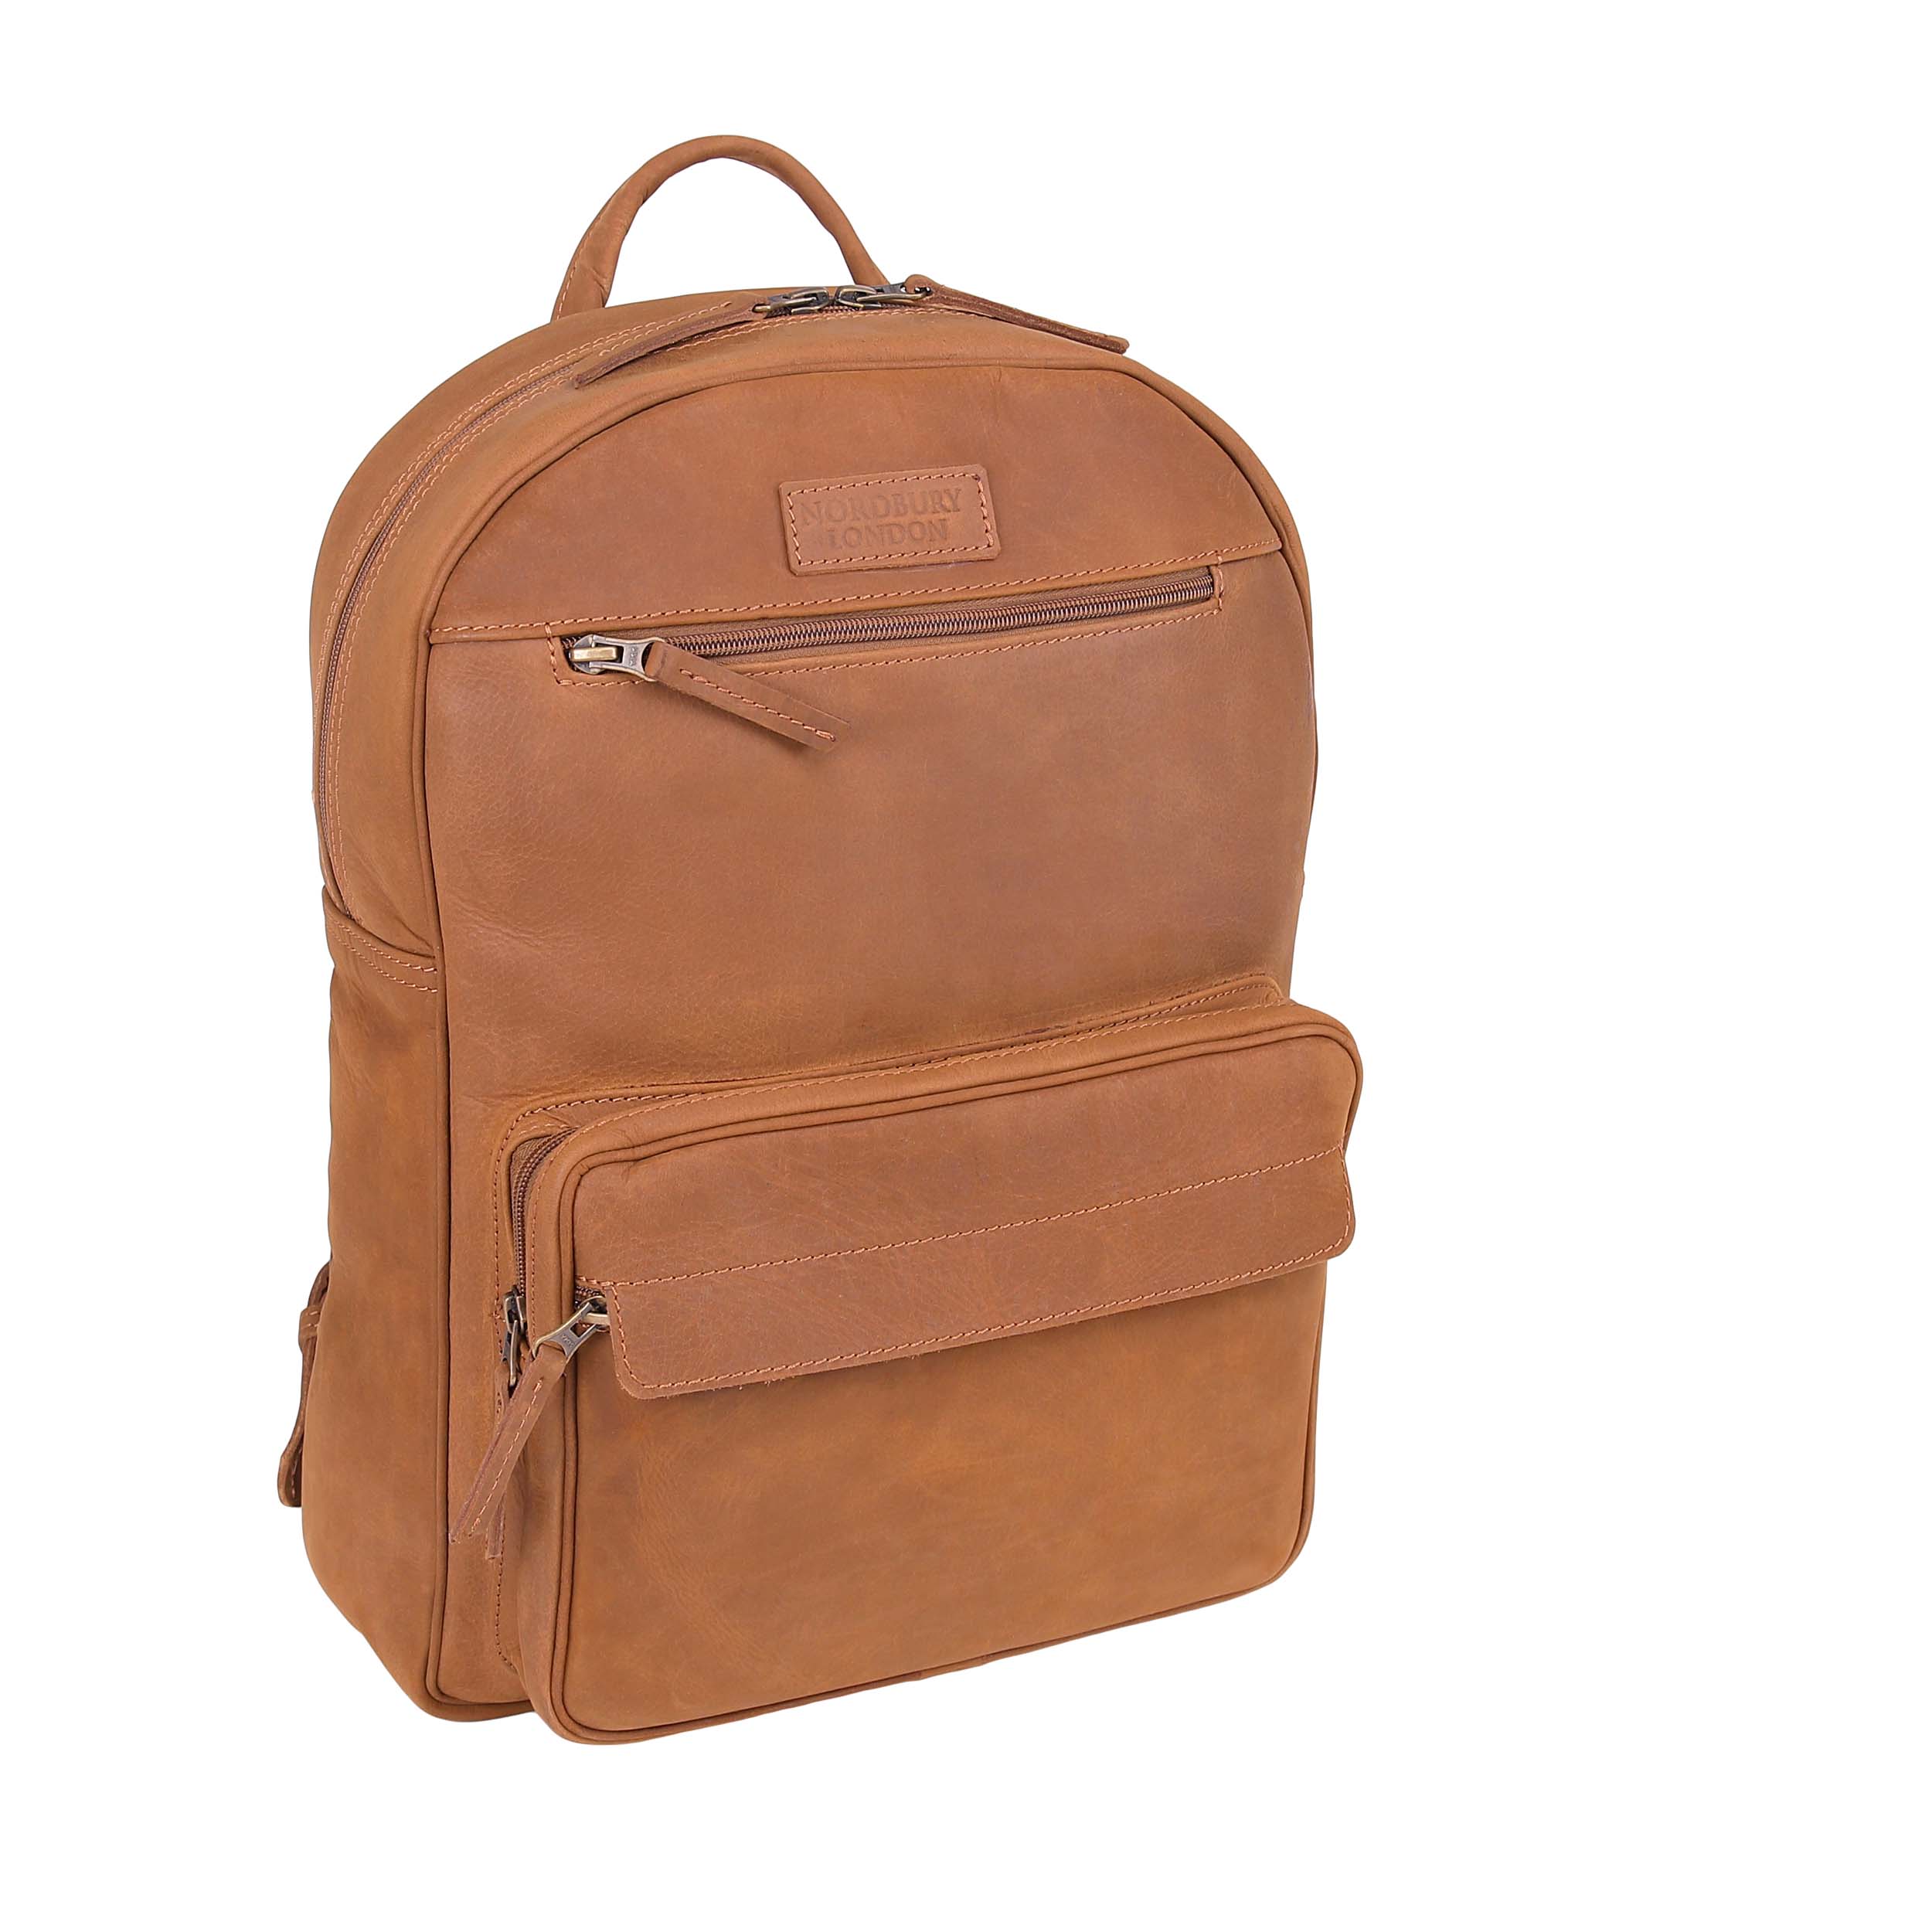 Leather Backpack 8893 - Light Brown